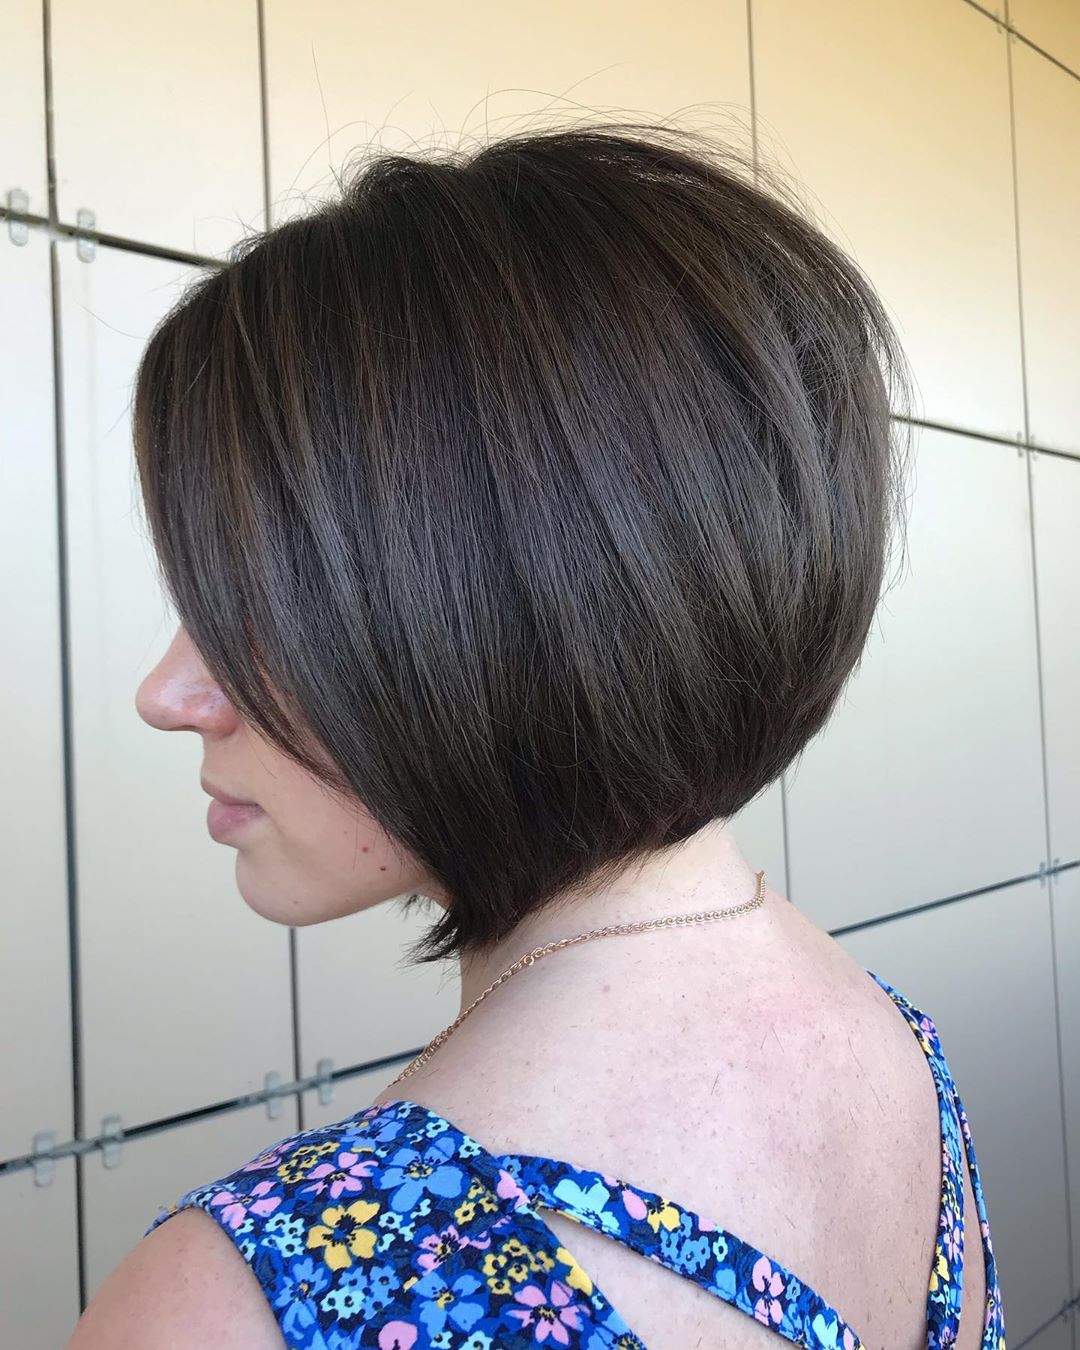 17 Stacked Inverted Bob Haircuts for Stylish, Edgy Girls